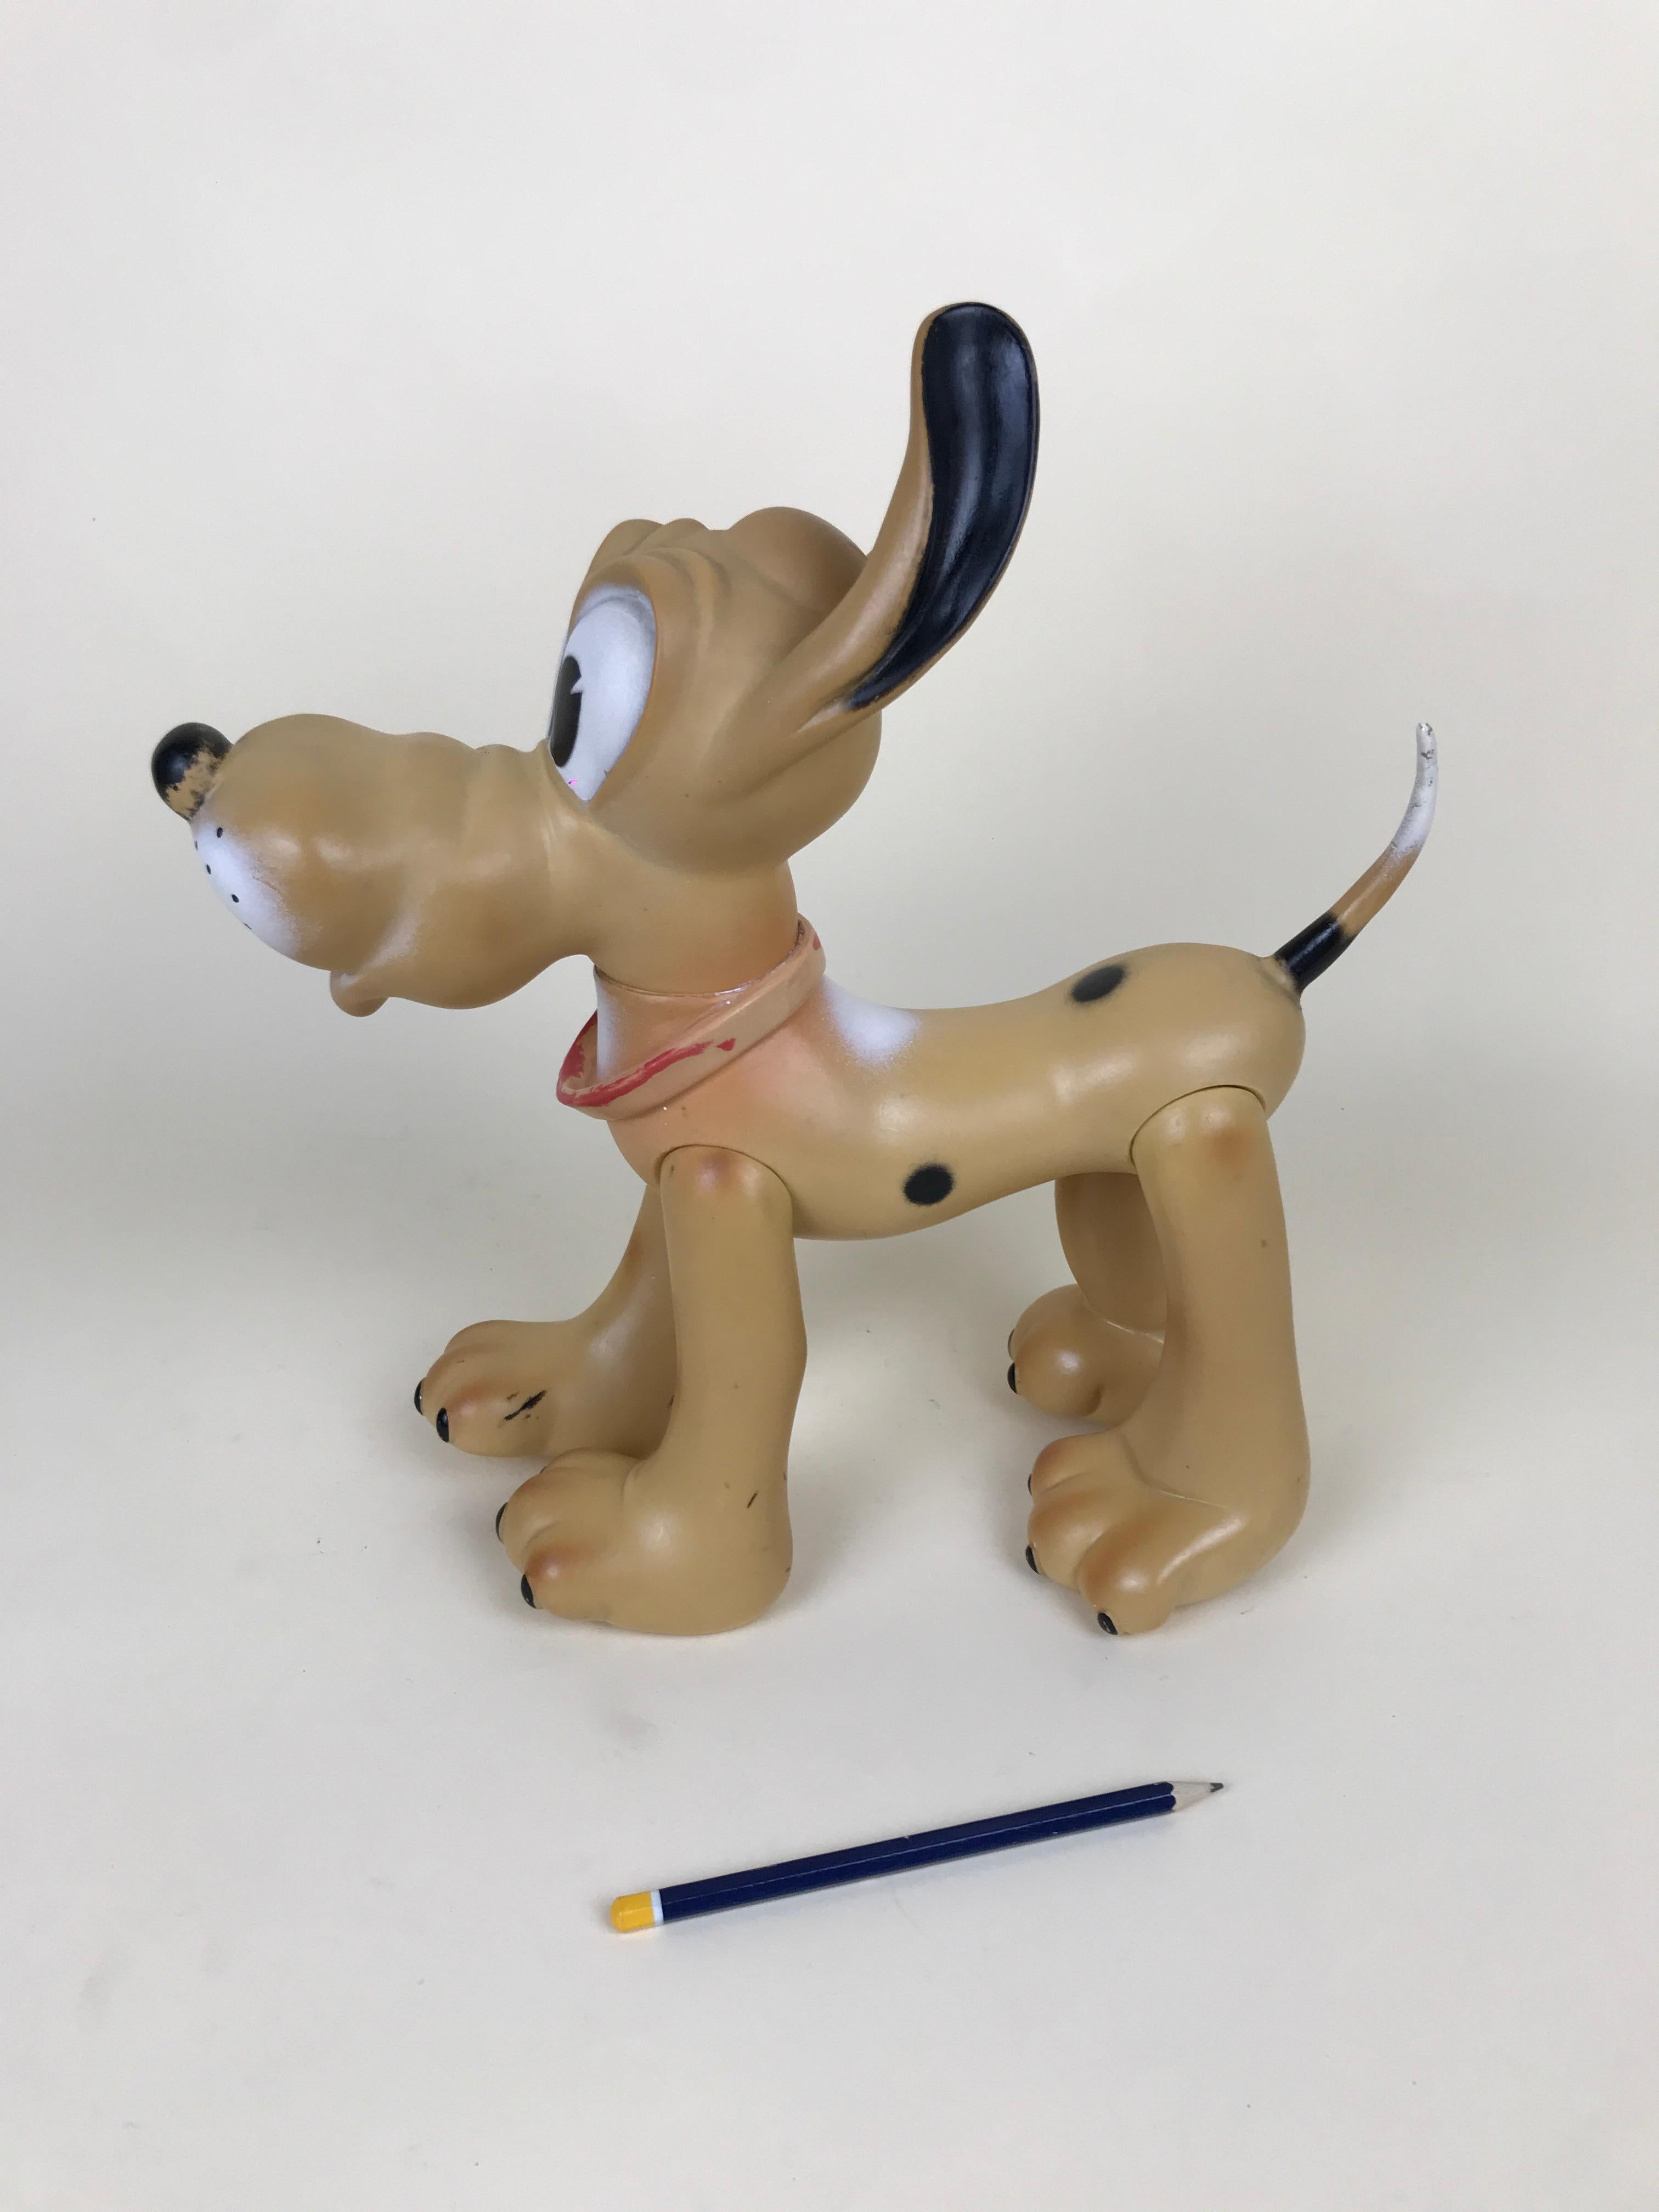 Vintage Pluto the pup squeak rubber toy made by Ledraplastic Italy in the 1960s.

All four legs and head are movable. 

Marked Walt Disney production on the back and stamped with Ledraplastic elephant symbol.

Collector's note:

In 1962, the